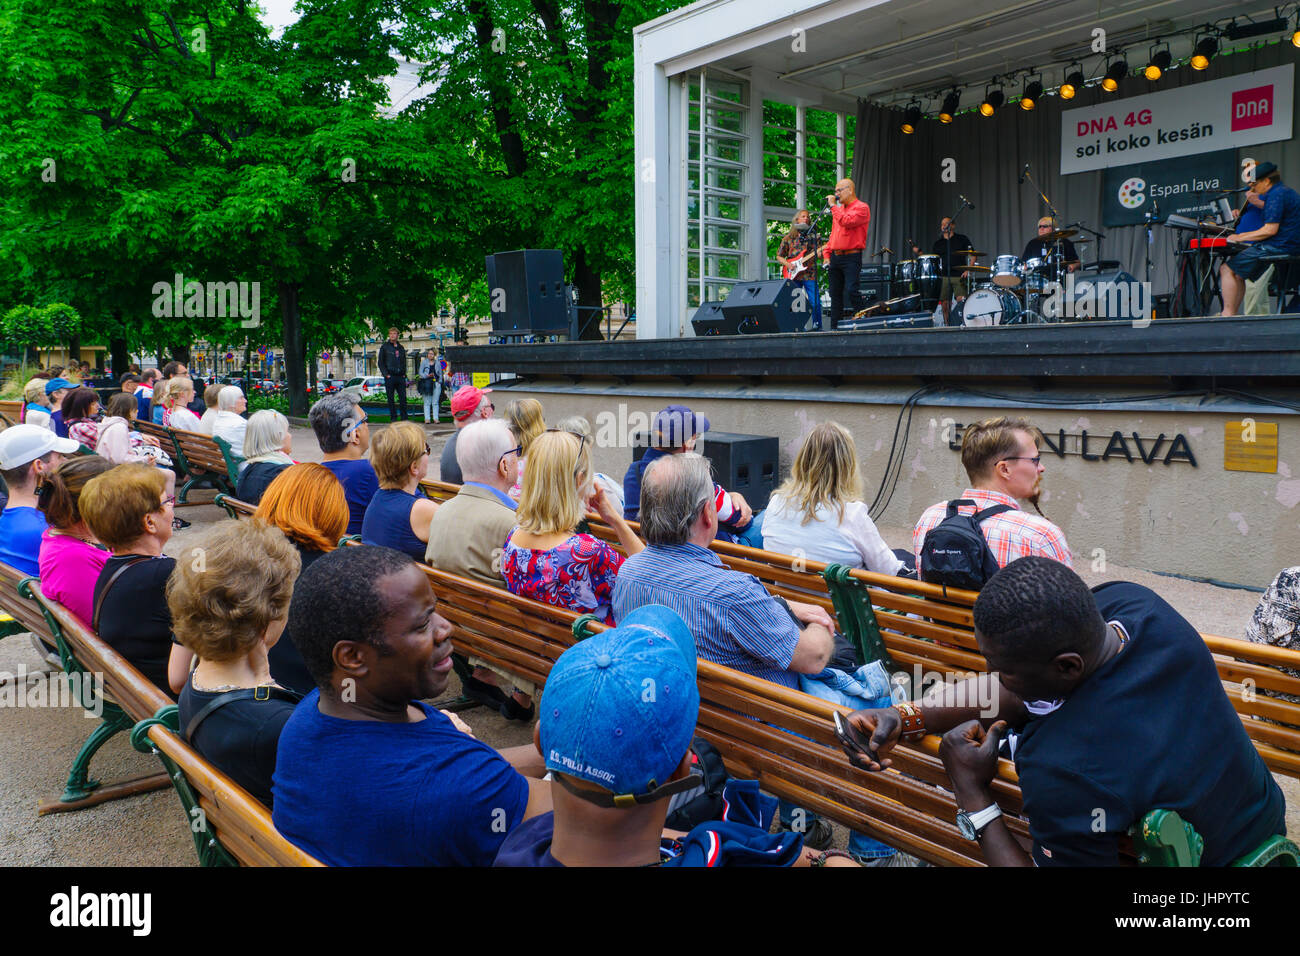 HELSINKI, FINLAND - JUNE 16, 2017: Scene of the Esplanade Park with musicians and audience, other locals and visitors, in Helsinki, Finland Stock Photo